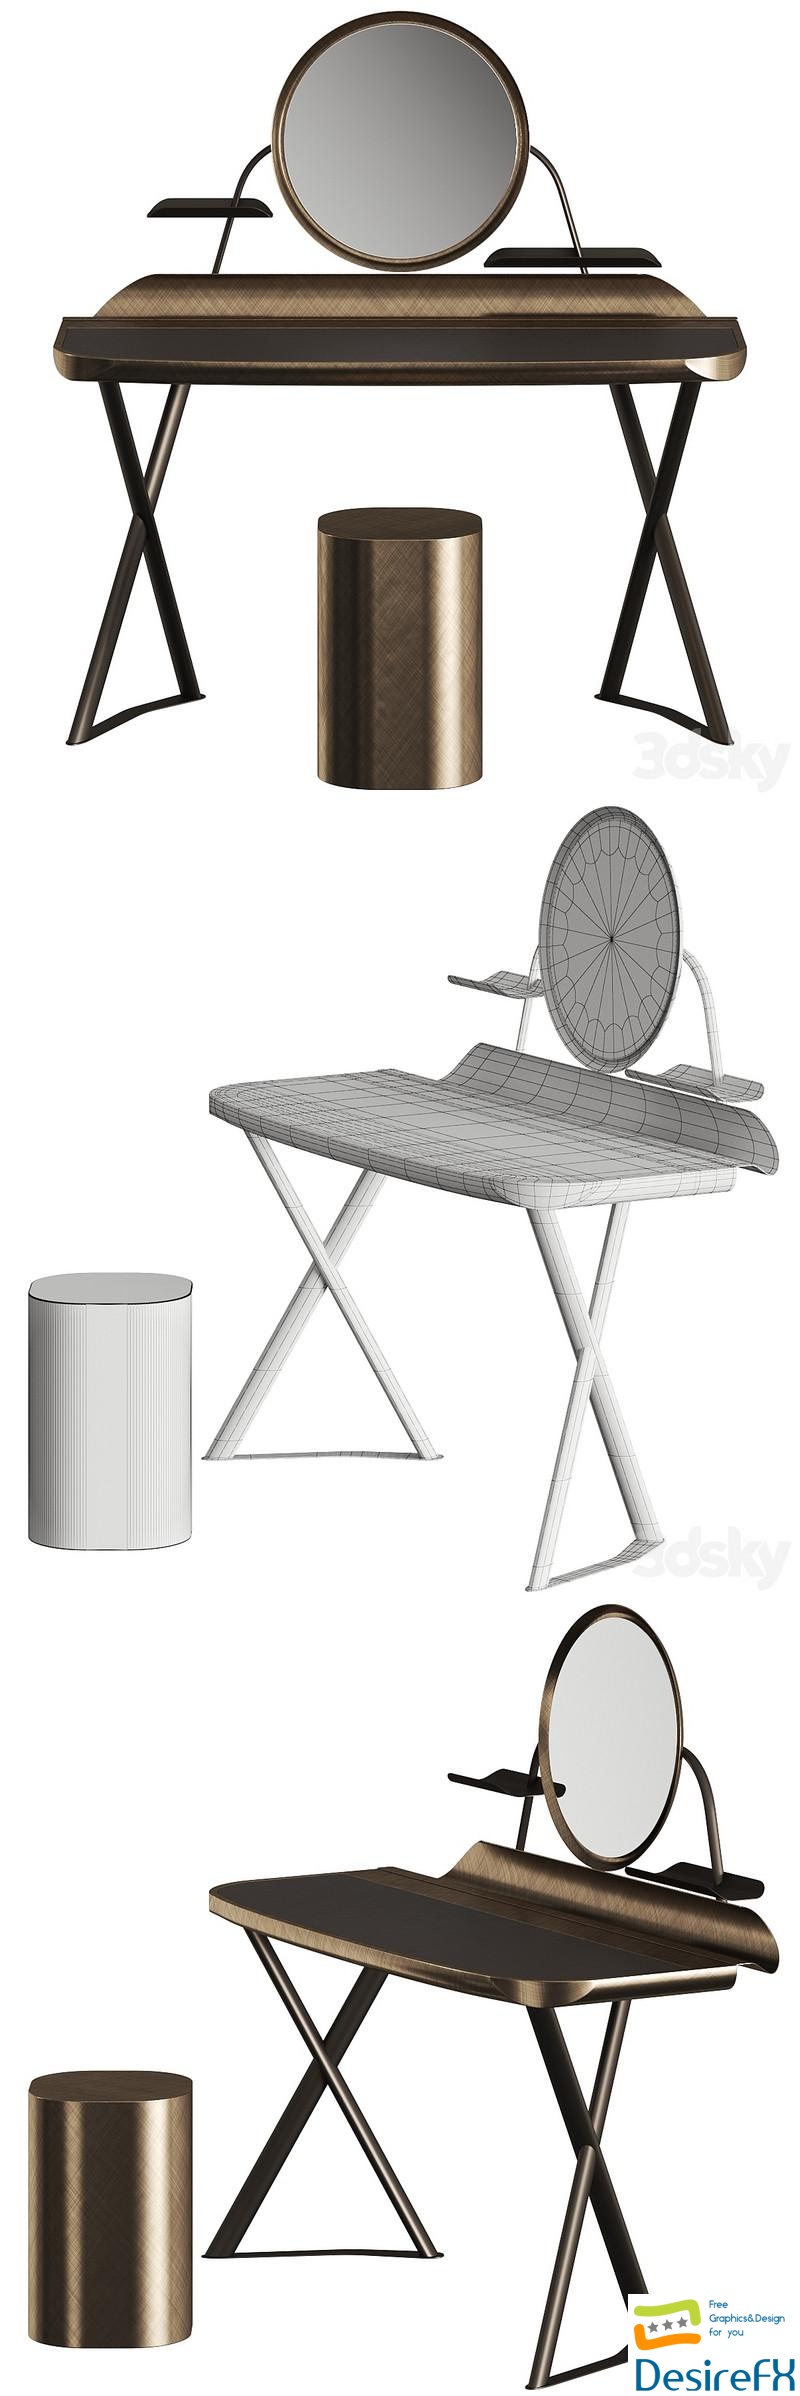 Cattelan Italia Cocoon Trousse Leather Desk and Pancho Stool 3D Model